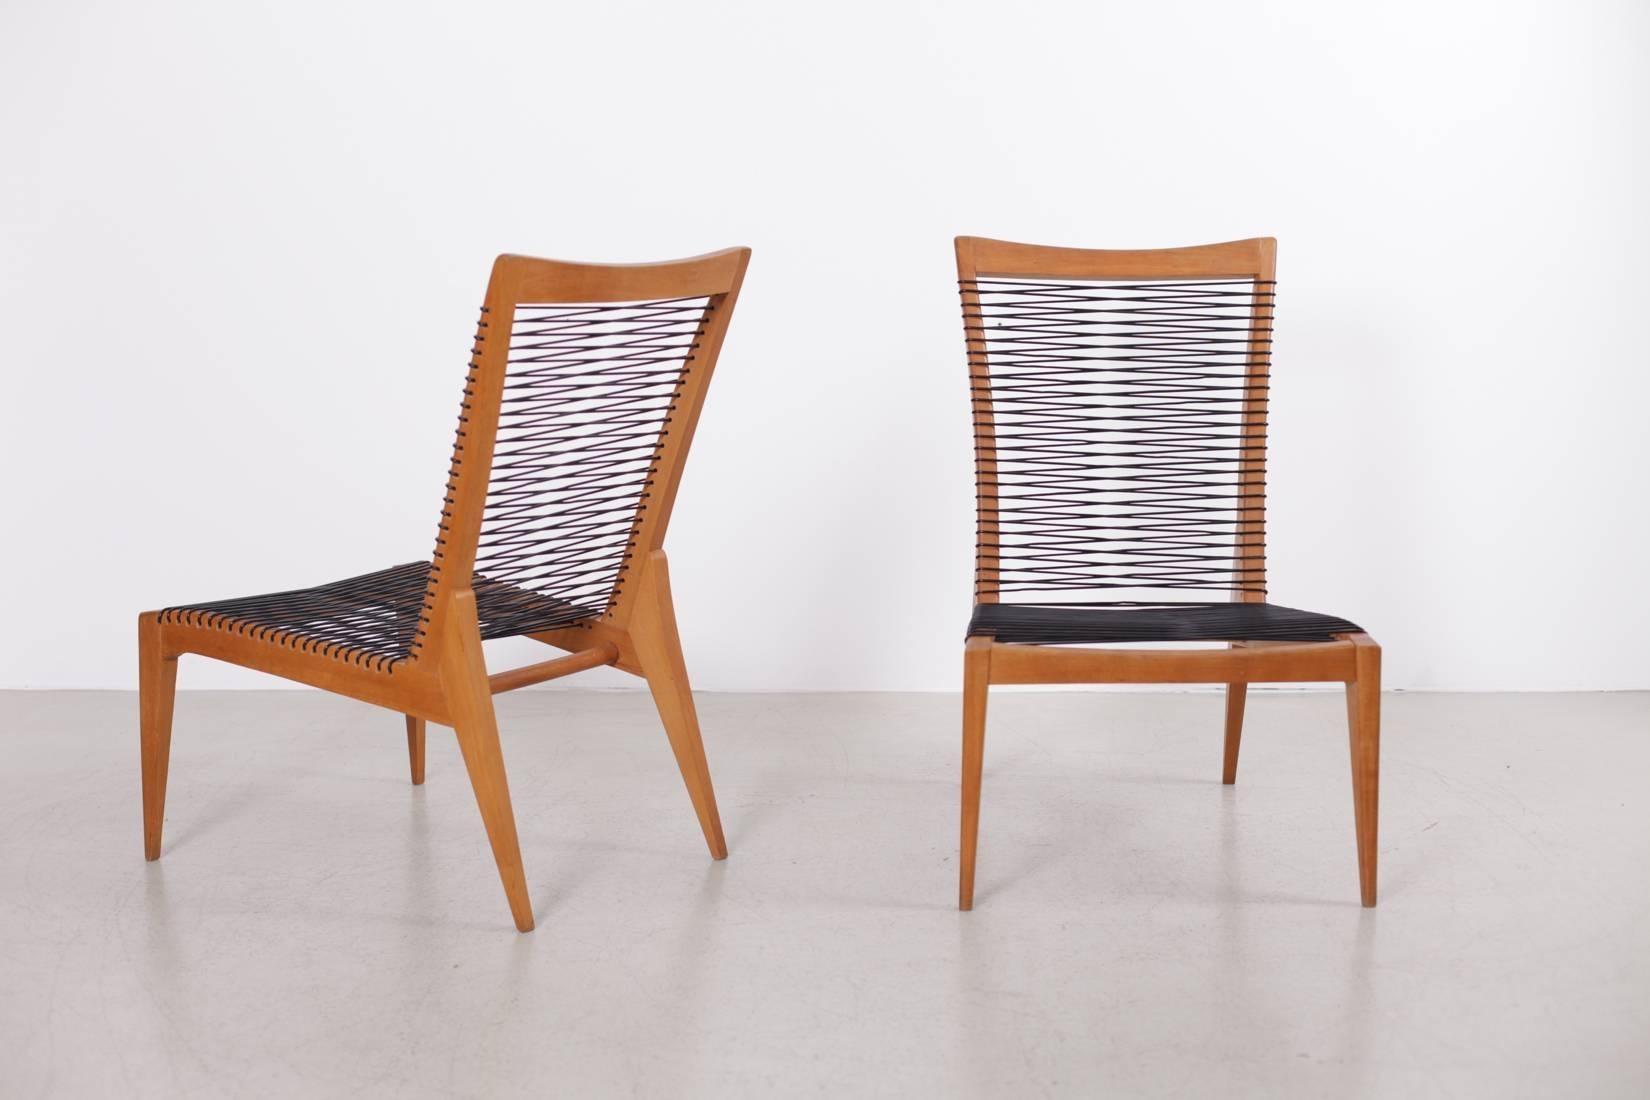 Rare pair of 1950 Louis Sognot lounge chairs in excellent condition. All original!
The French designer collaborates with the Atelier Primavera founded in 1912 by the department store, Printemps, in order to conceive crafted modern furniture and